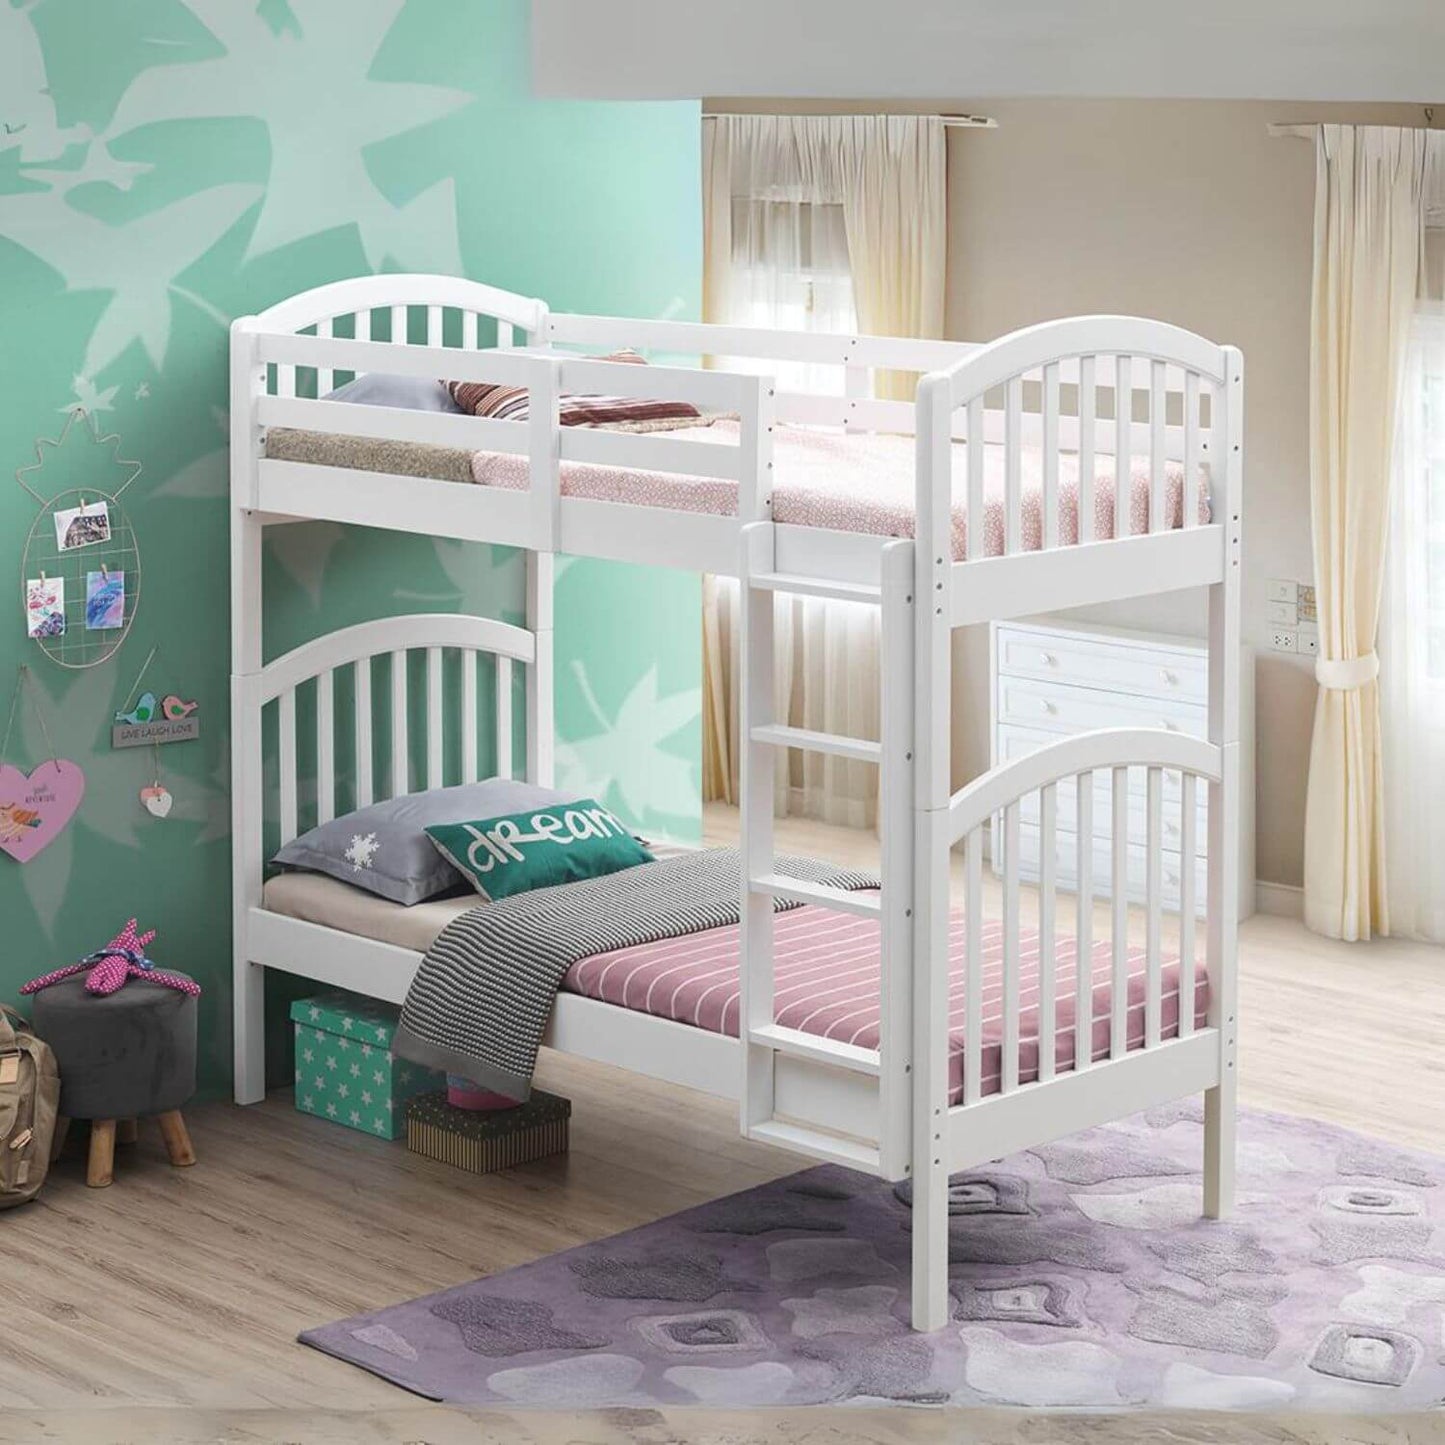 Orbelle Bunk Bed Twin over Twin Model 450 White - Lifestyle